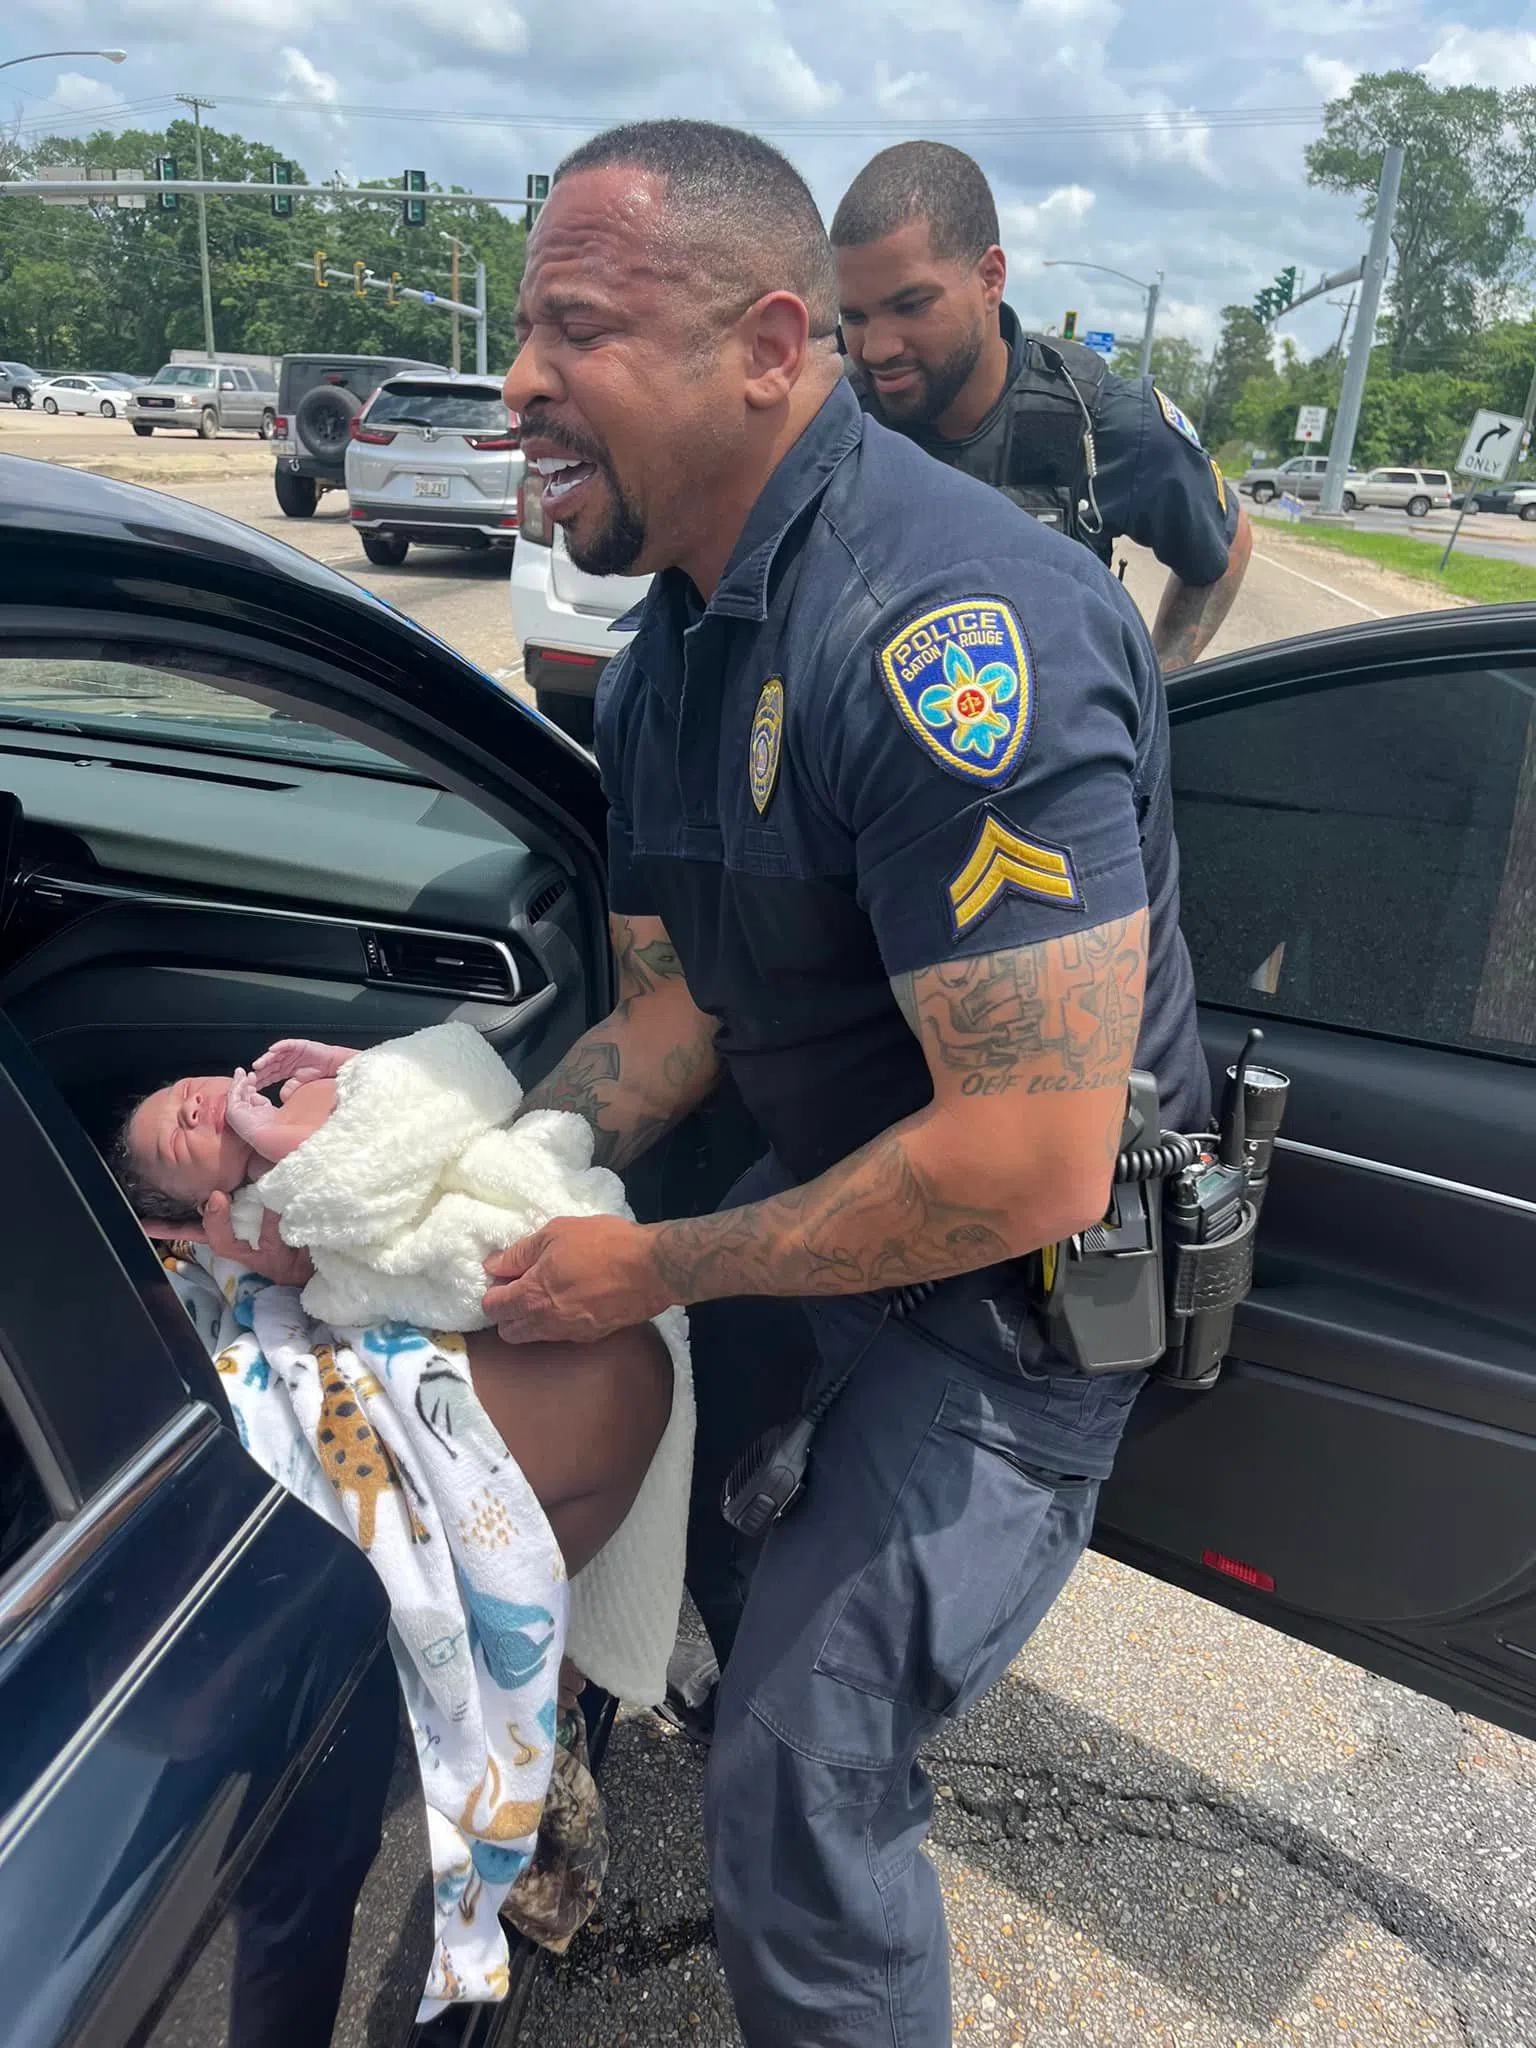 BRPD officer takes protect and "serve" to a new level by delivering a baby